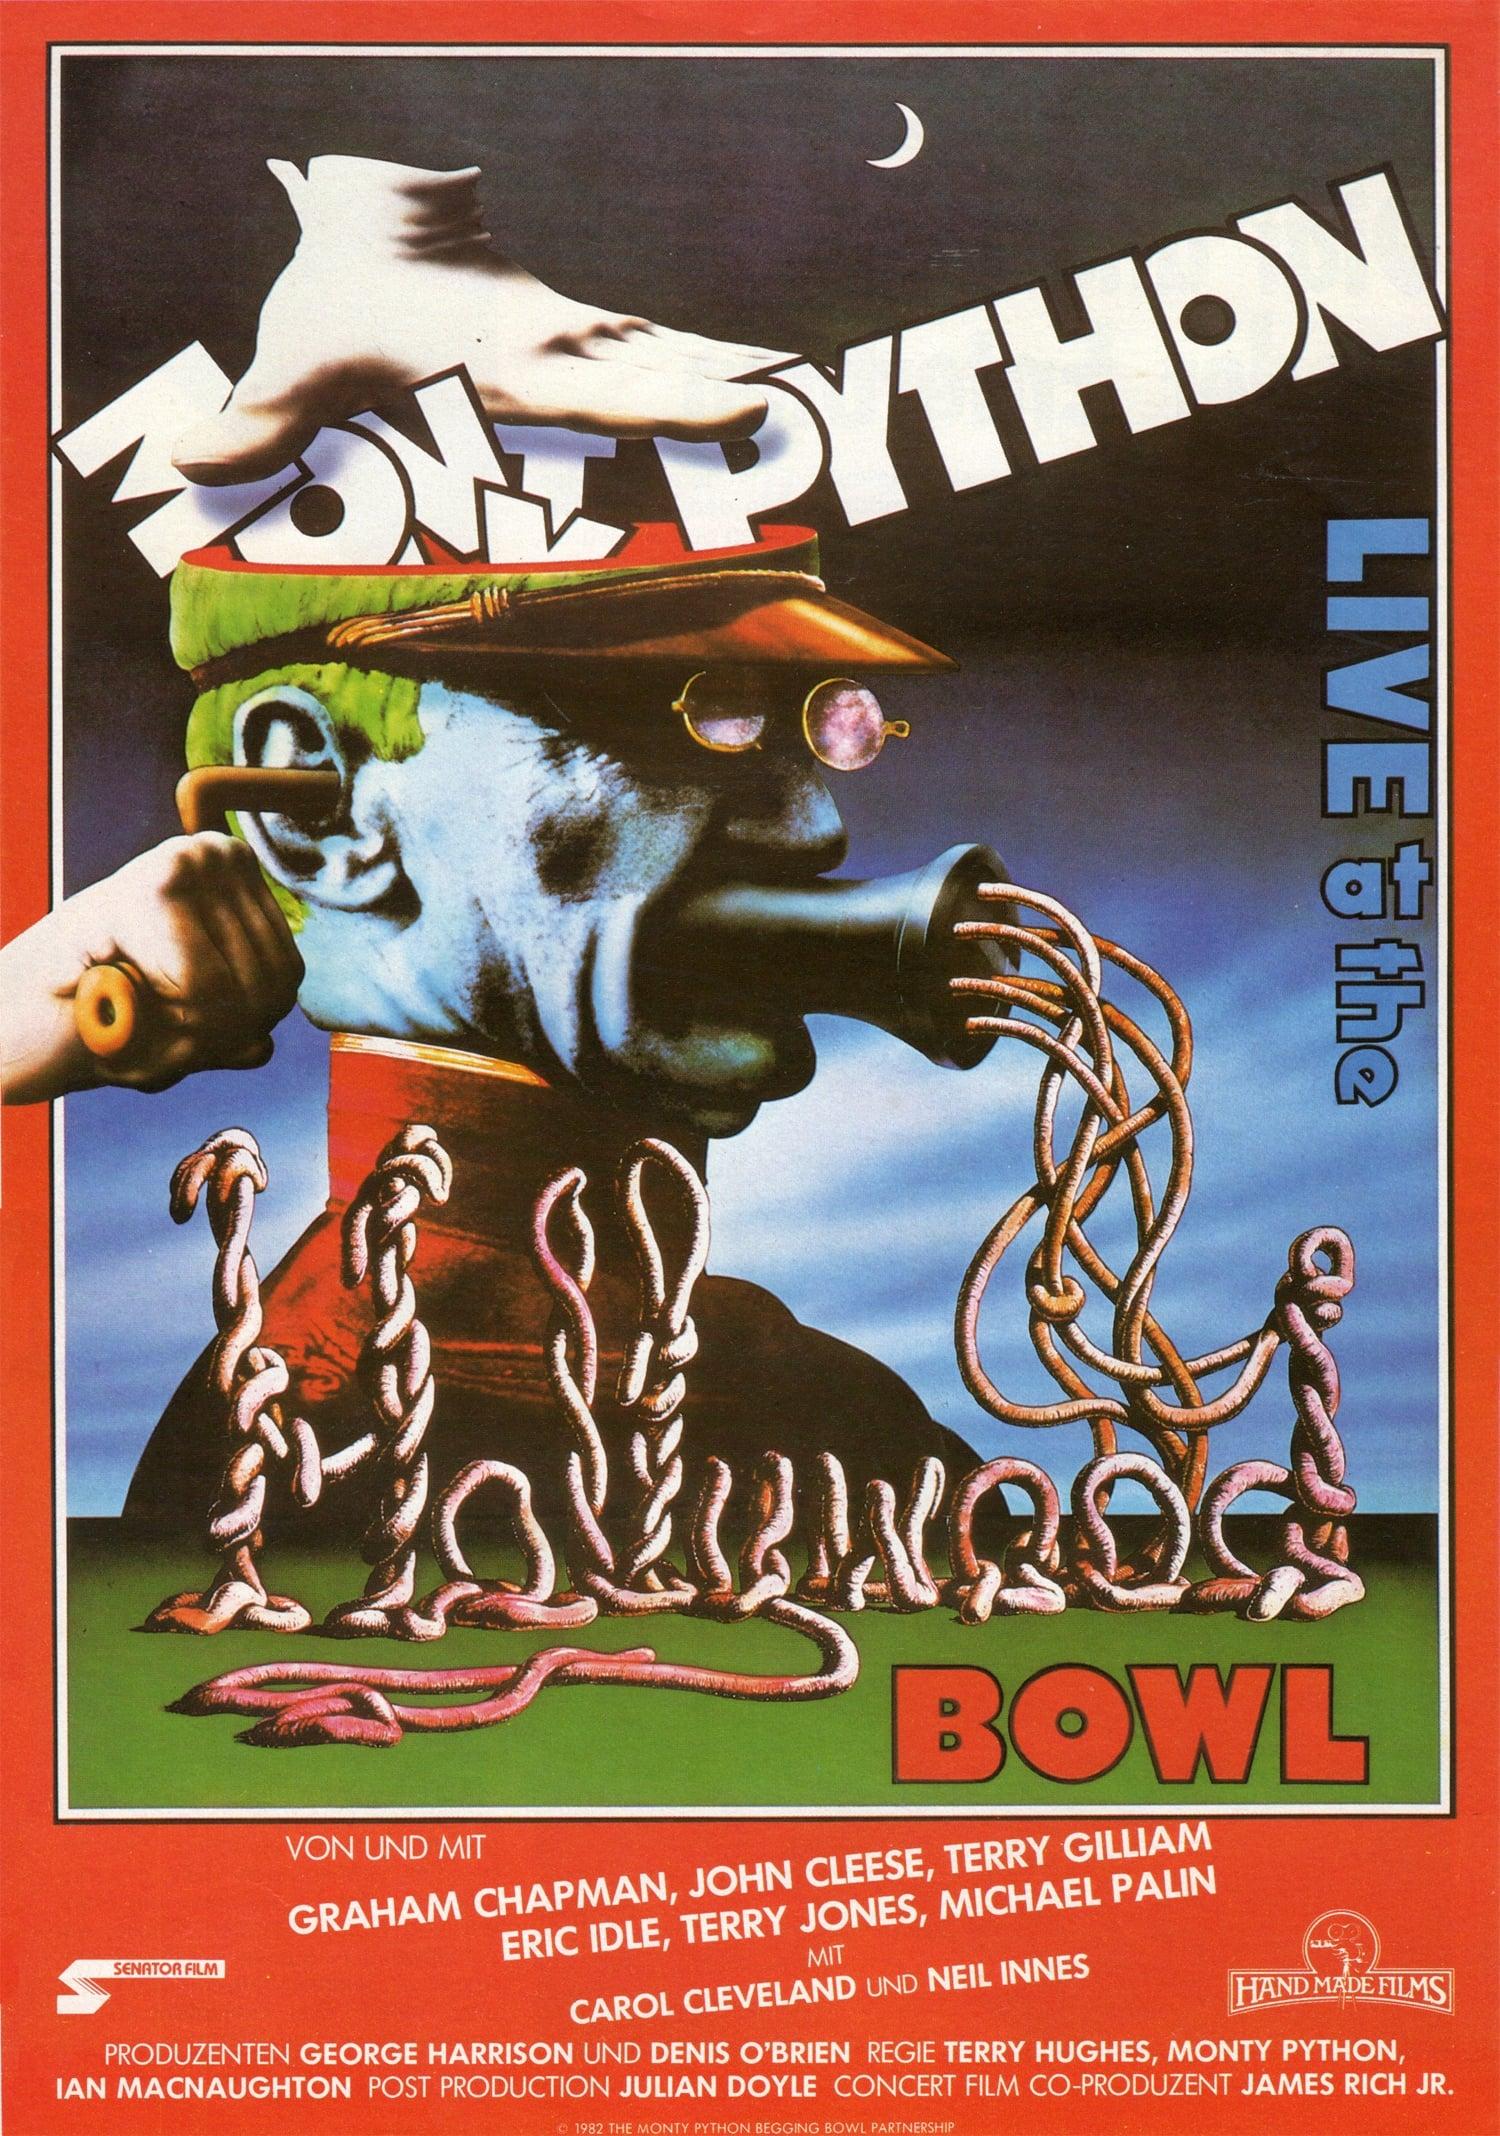 Monty Python Live at the Hollywood Bowl poster